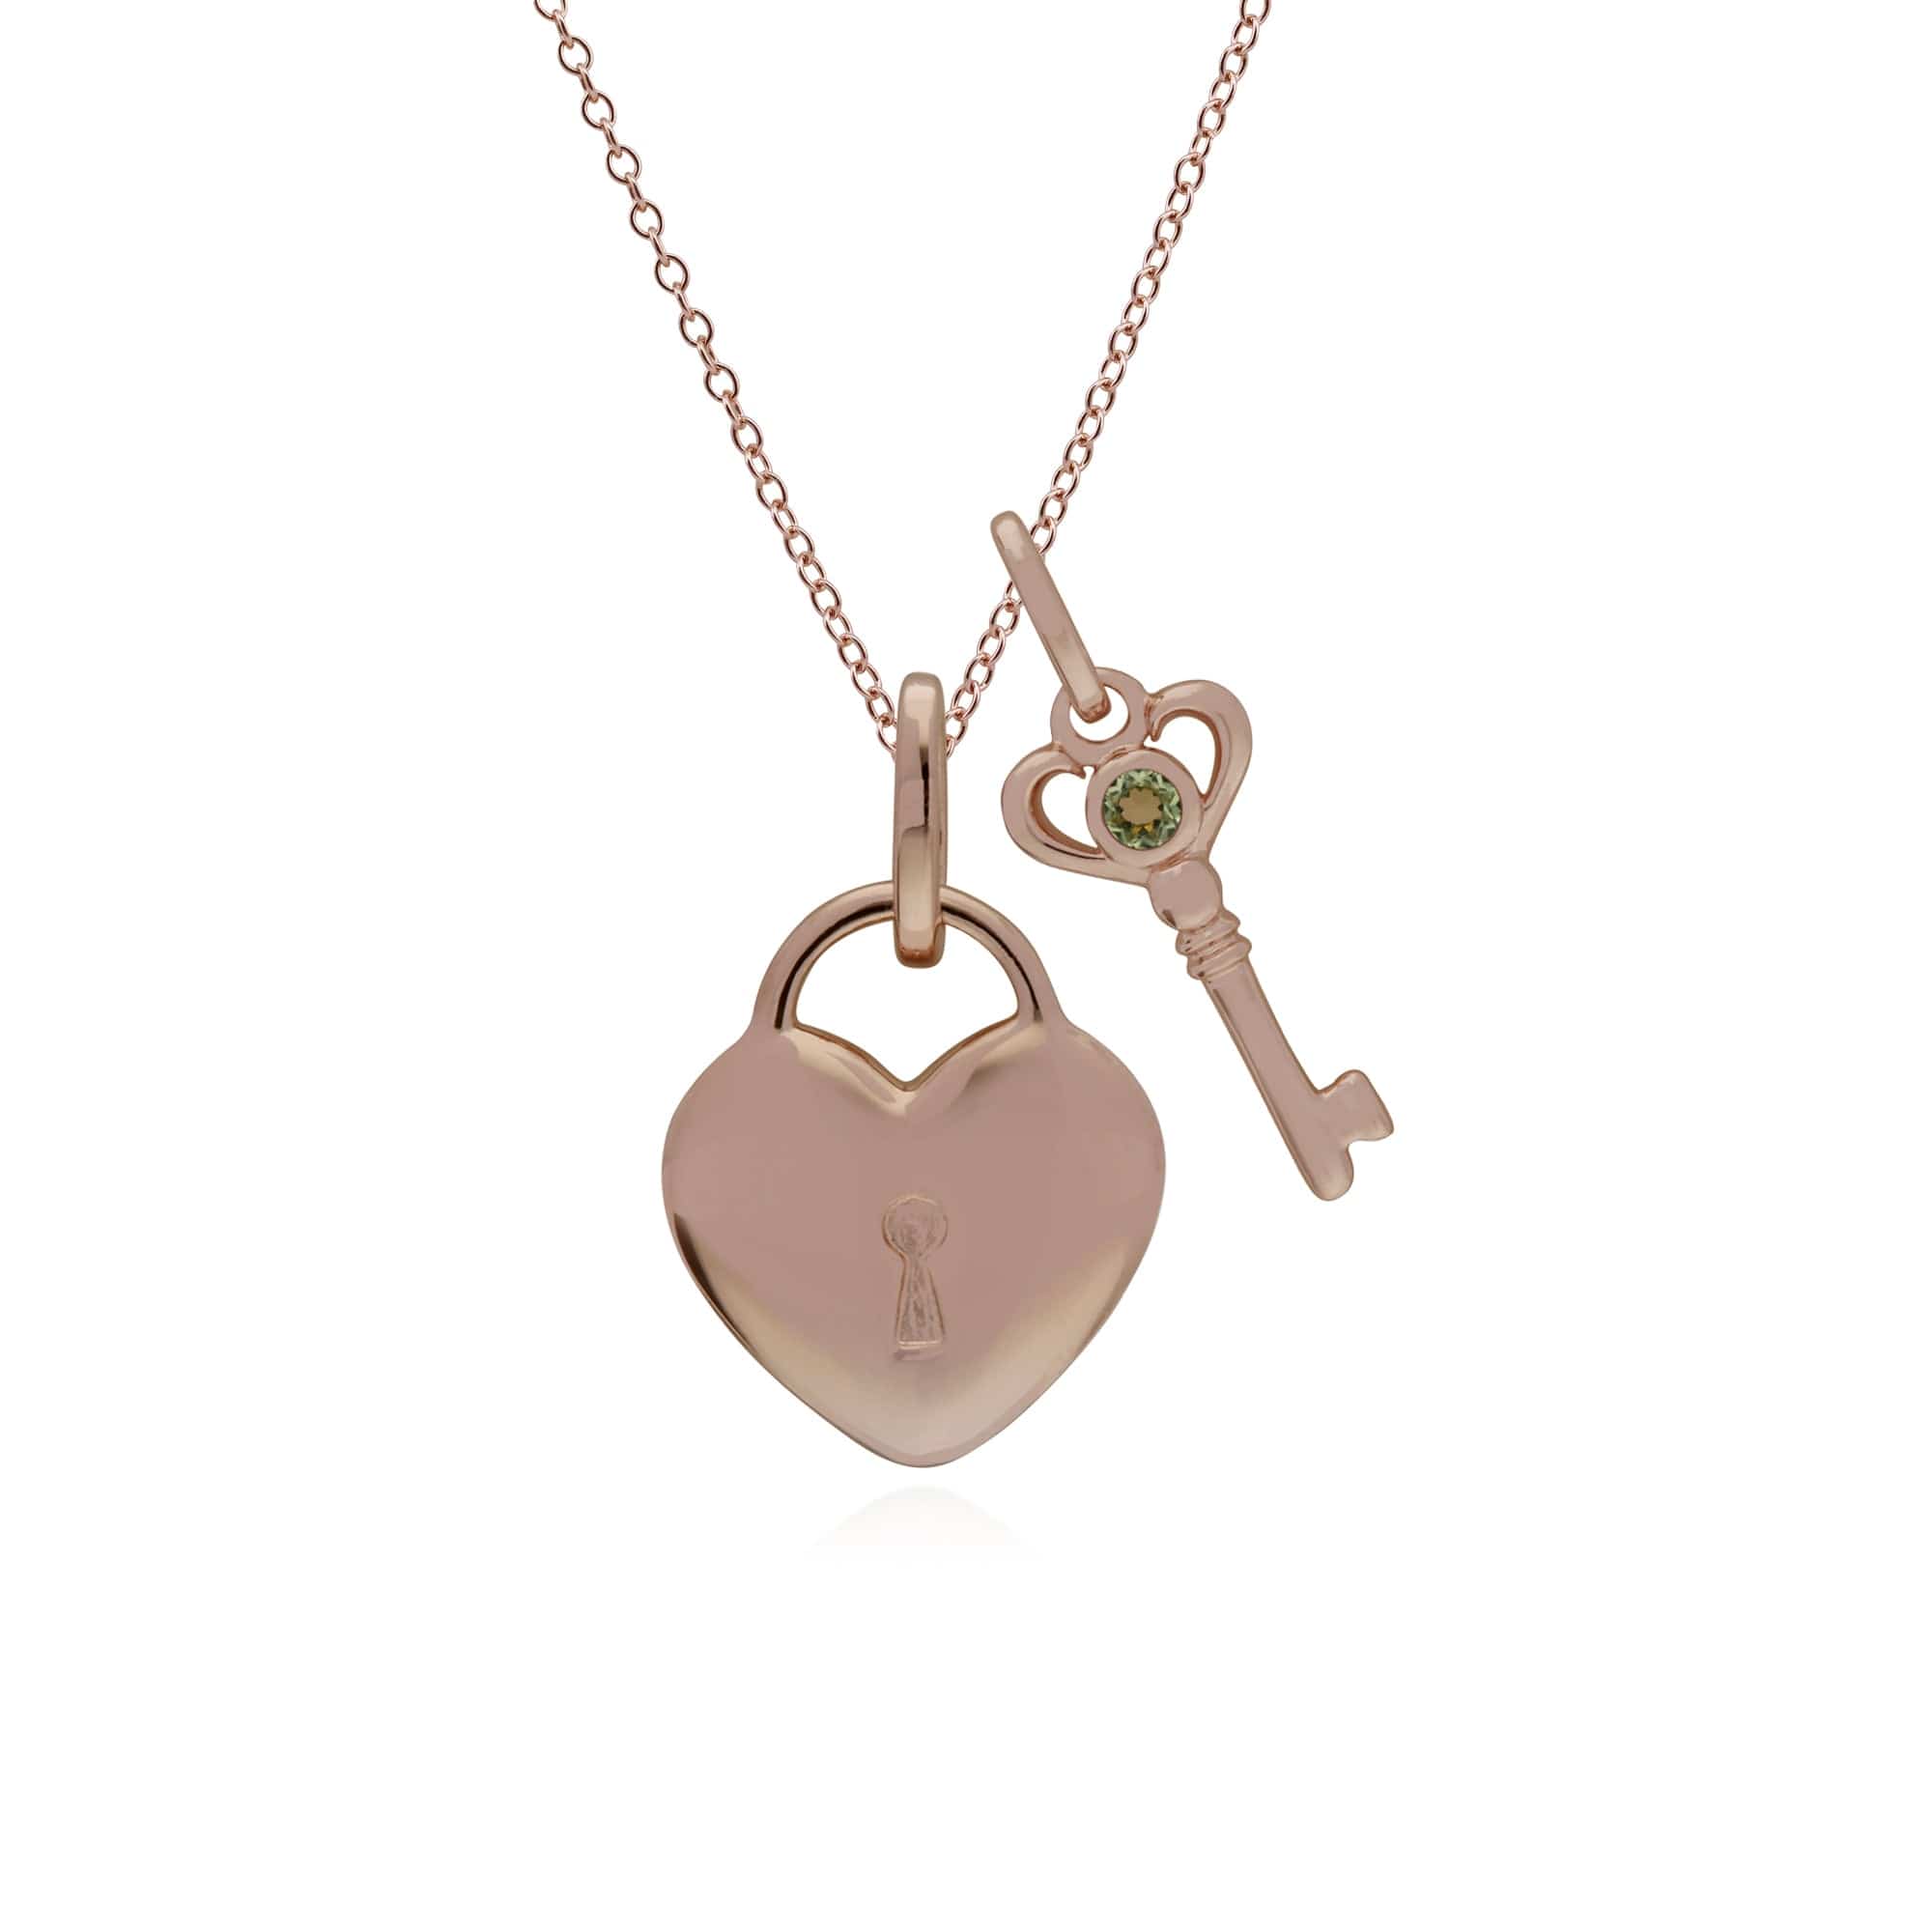 270P026307925-270P026901925 Classic Heart Lock Pendant & Peridot Key Charm in Rose Gold Plated 925 Sterling Silver 1